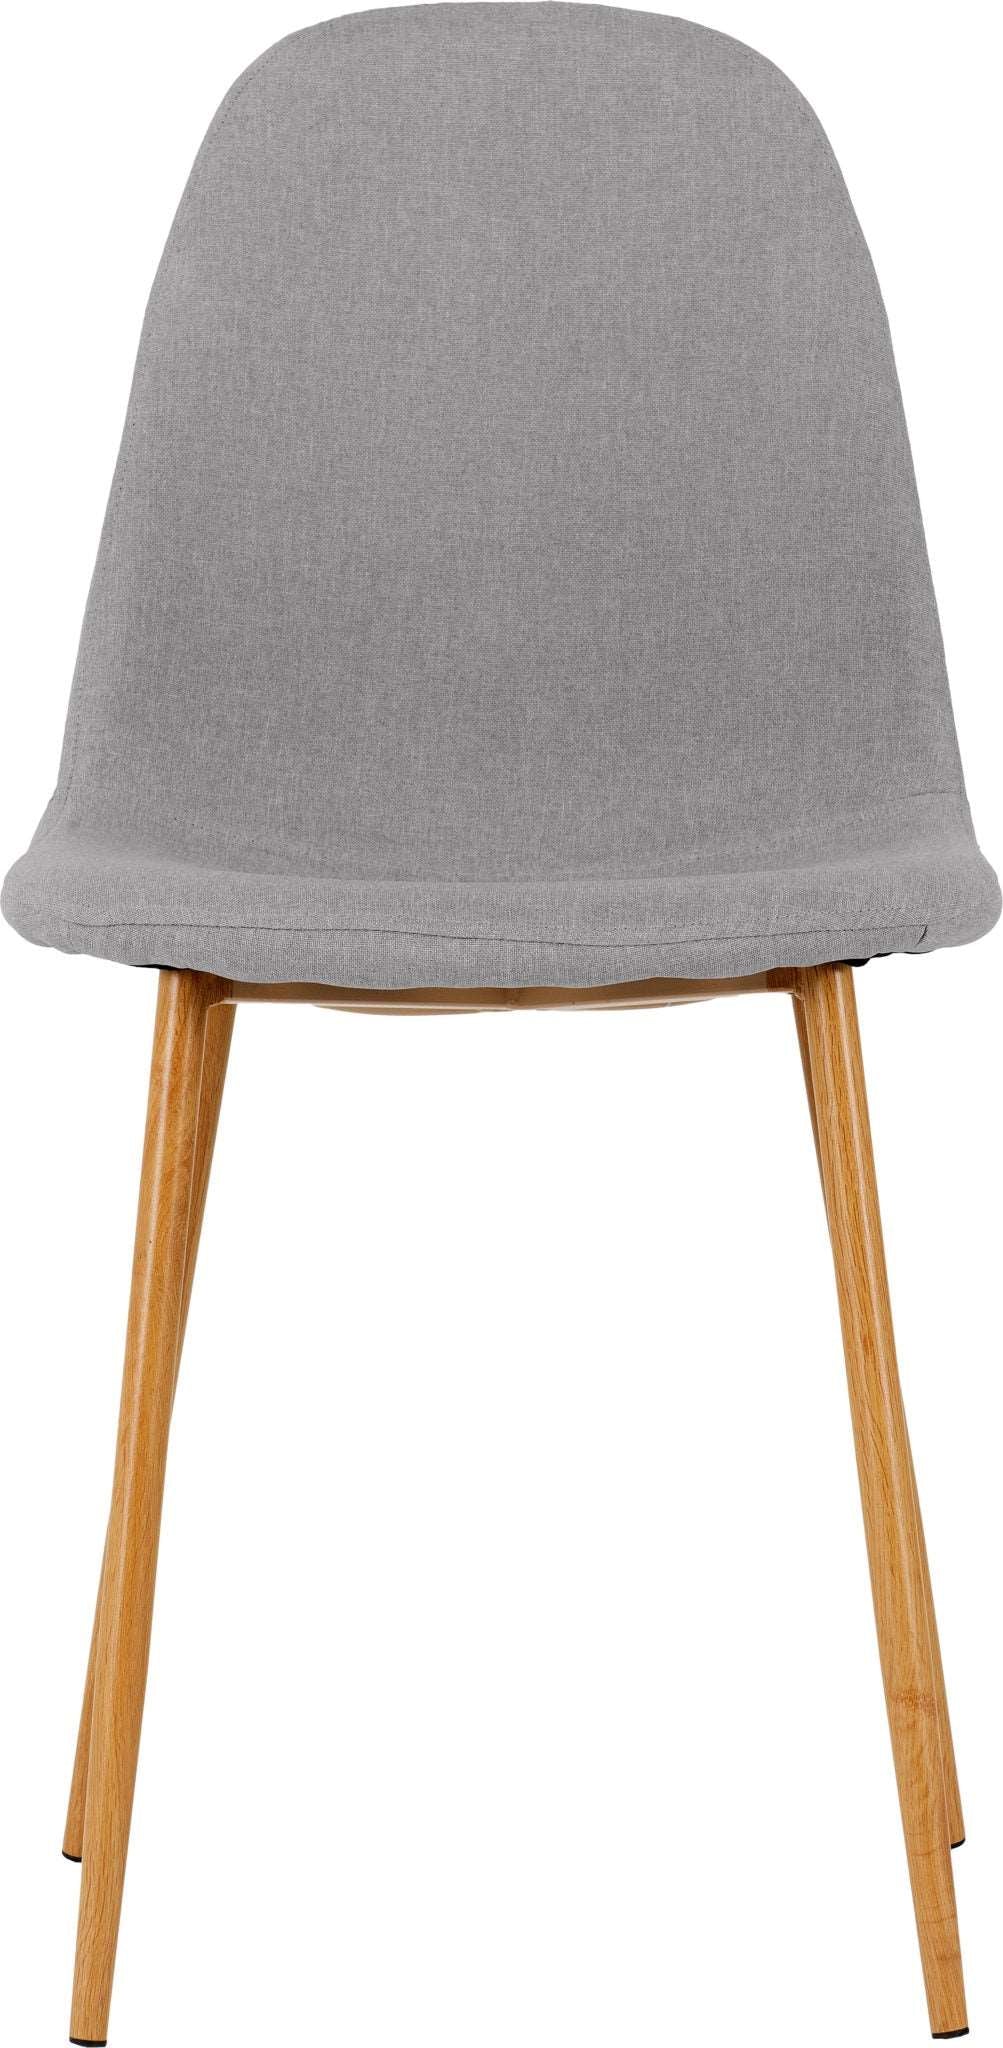 Barley Set of 4 Dining Chairs in Grey Fabric